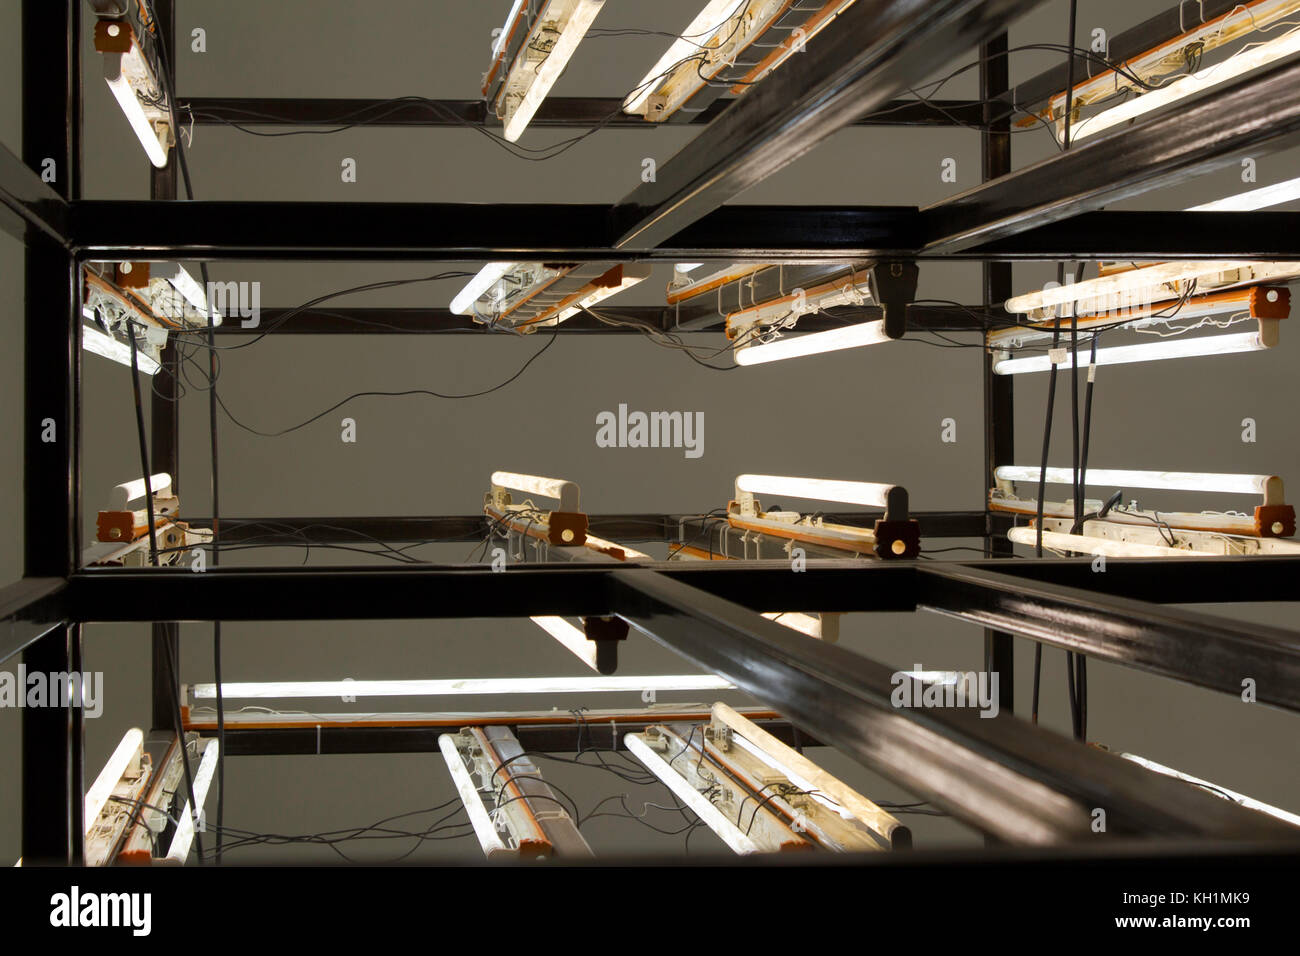 Many neon lights mounted on a metal structure and used for a technological experiment. Stock Photo